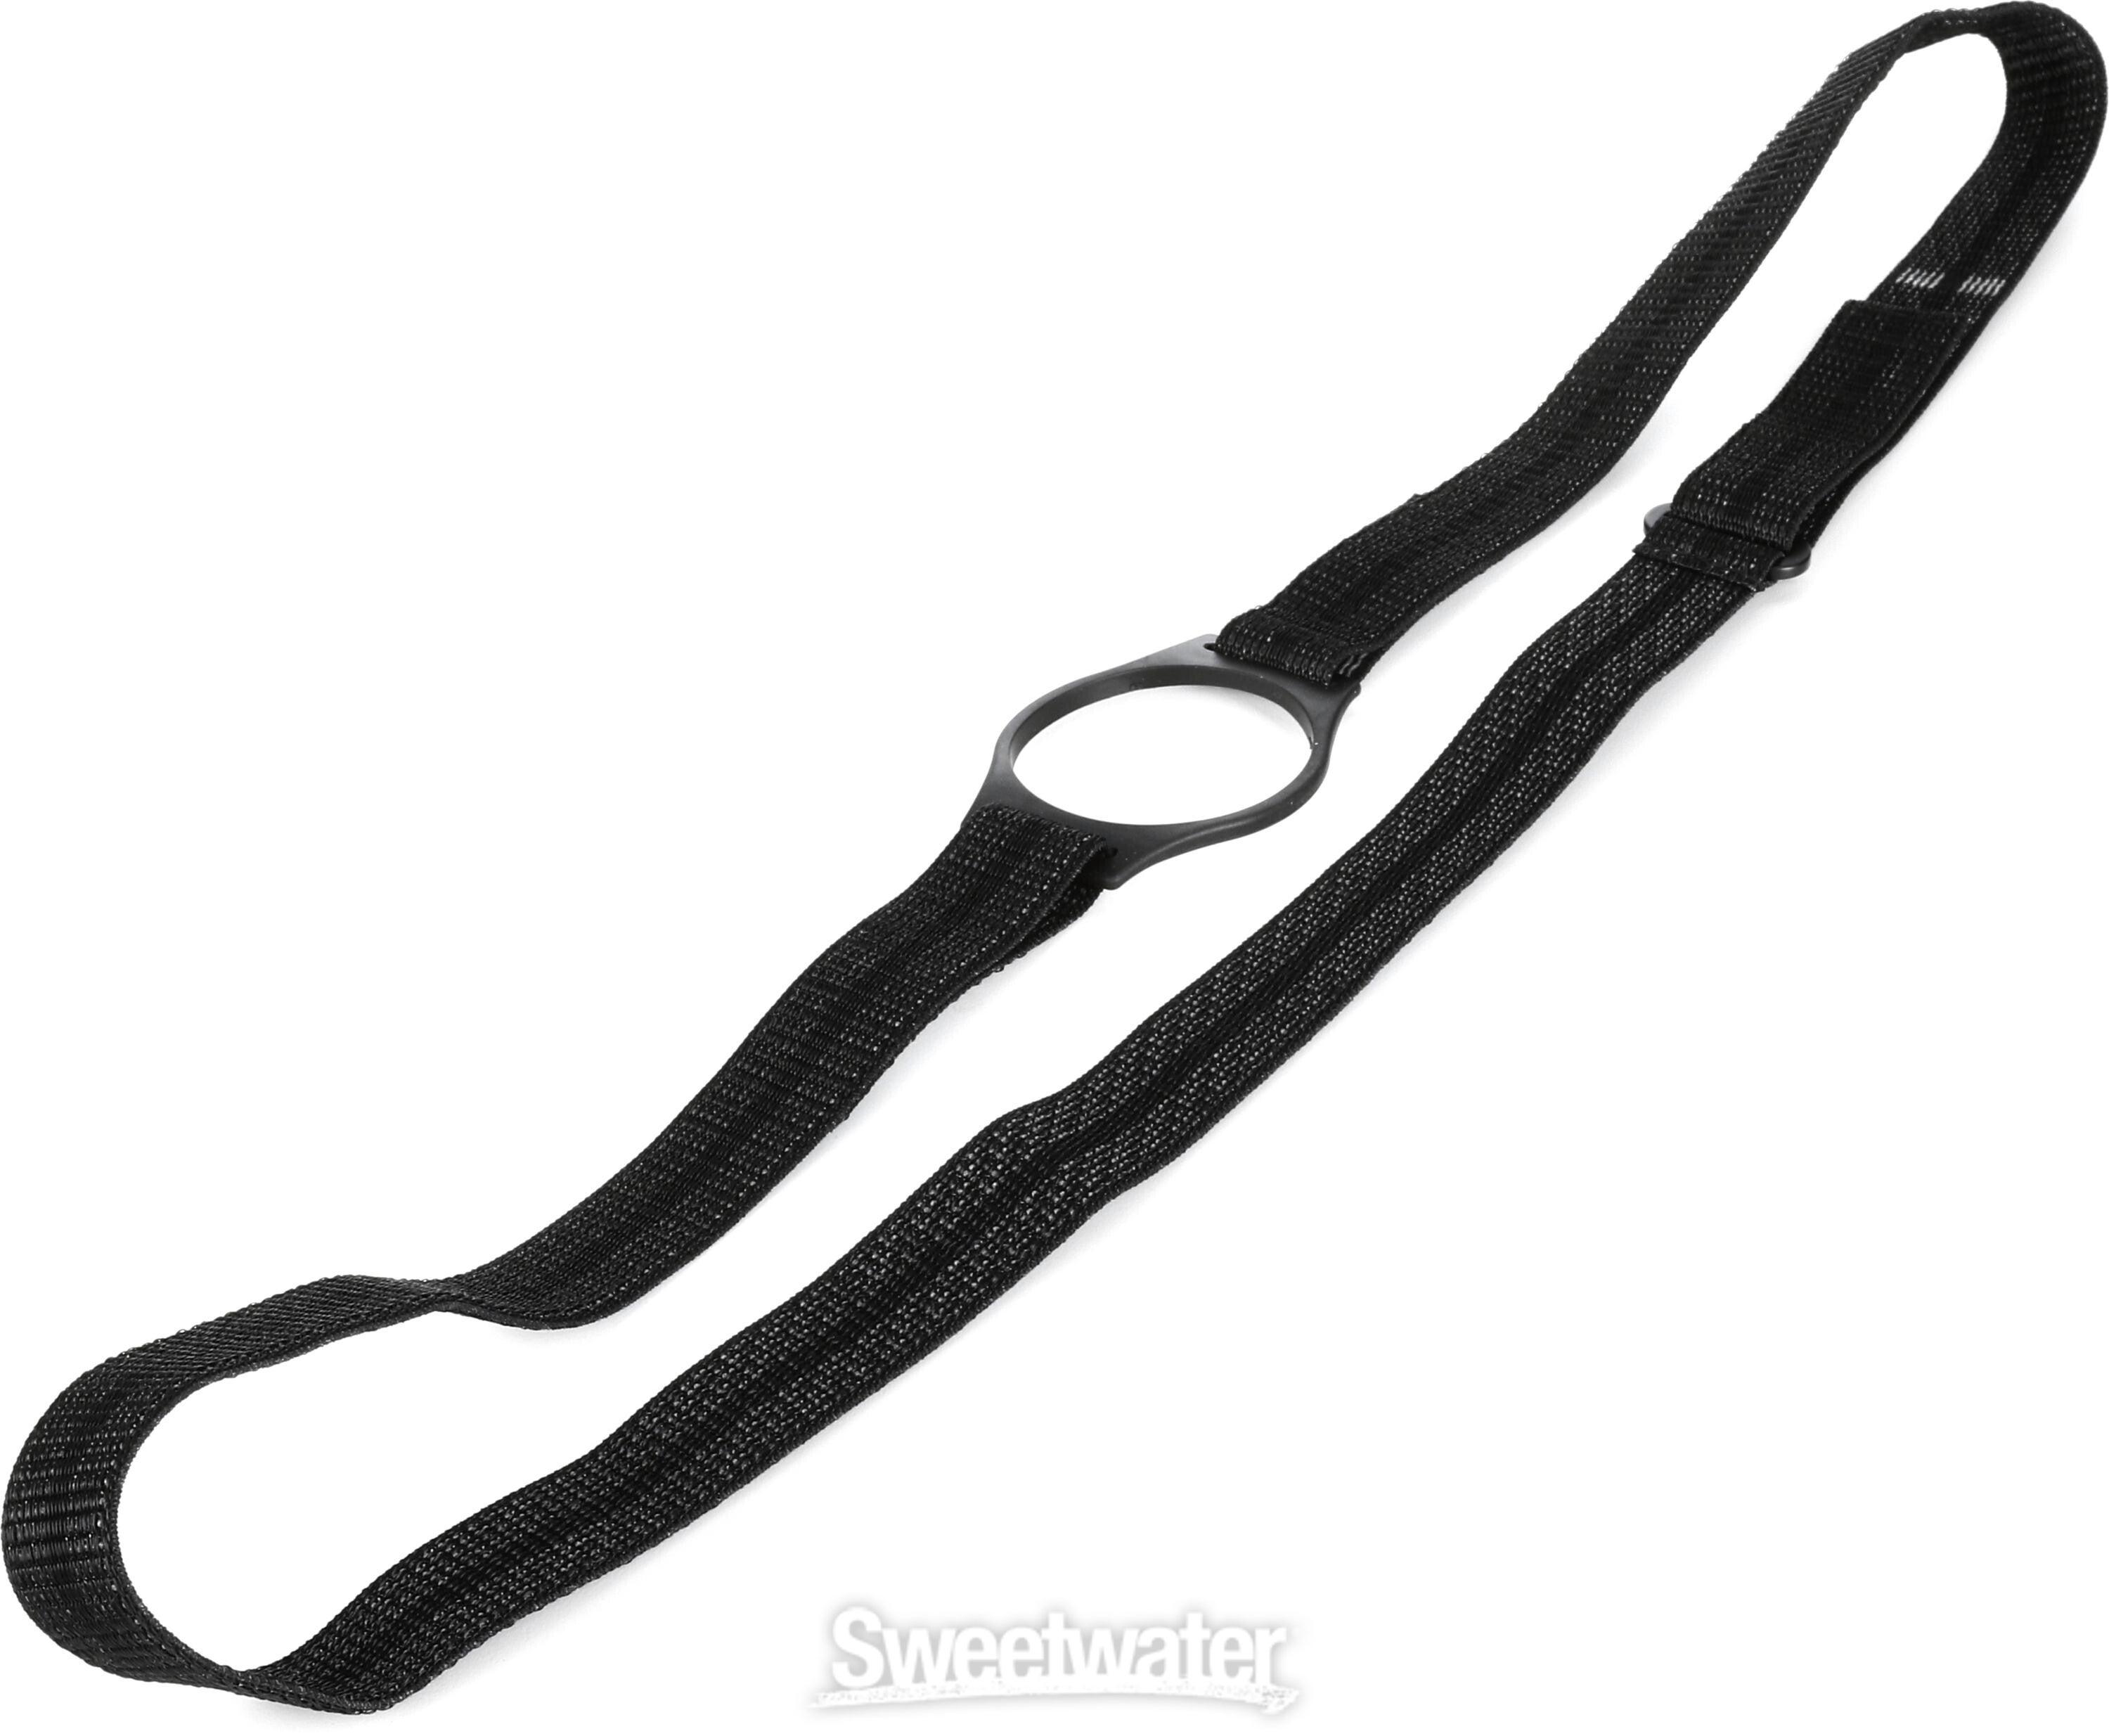 Soundbrenner Body Strap for Pulse Metronome | Sweetwater